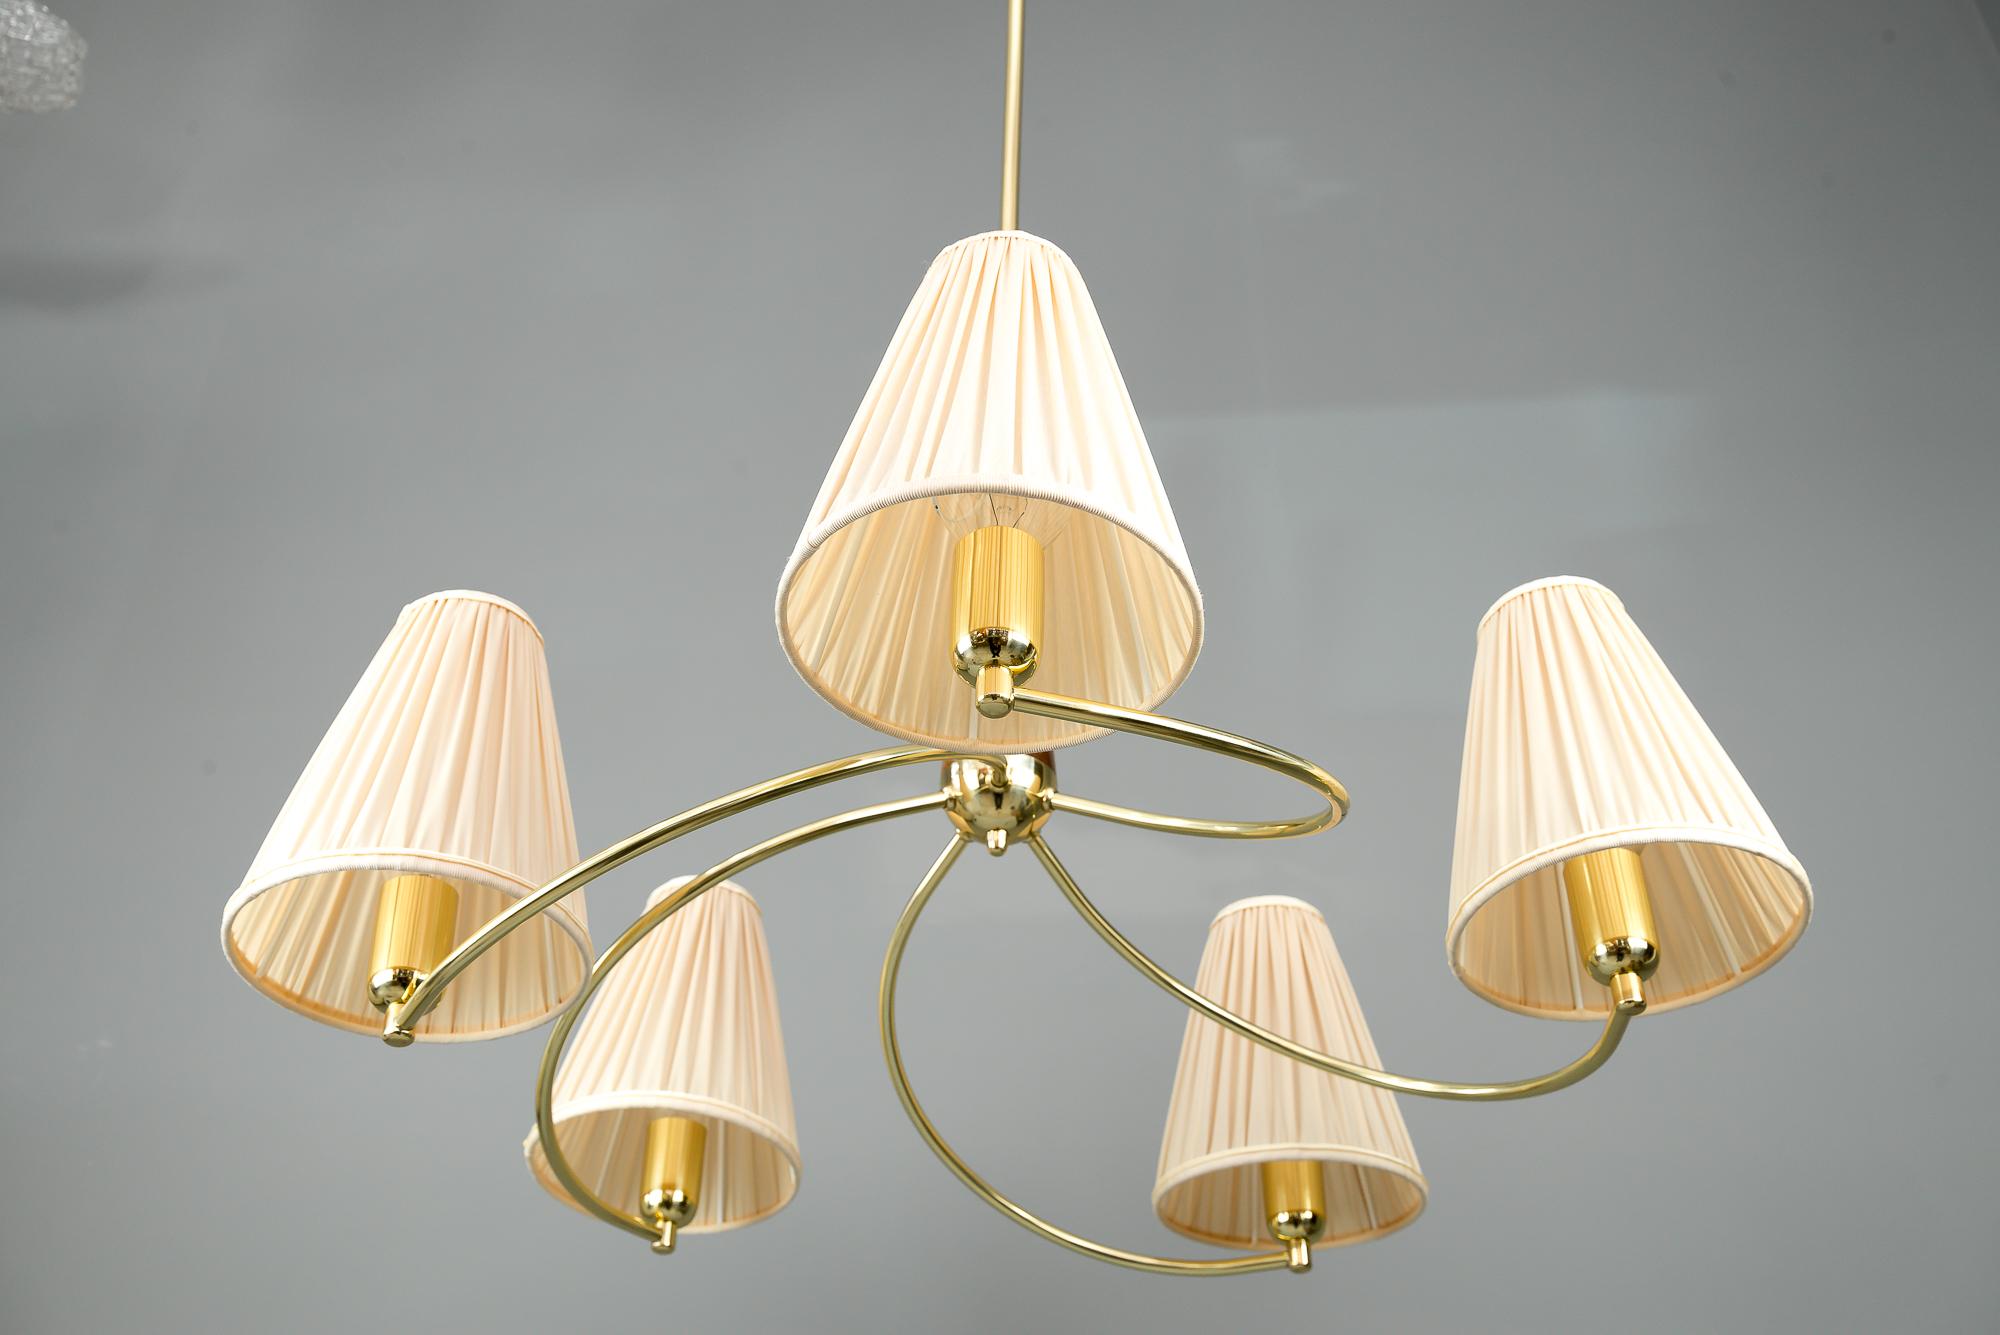 Lacquered Rupert Nikoll Chandelier with Nut Wood, circa 1950s